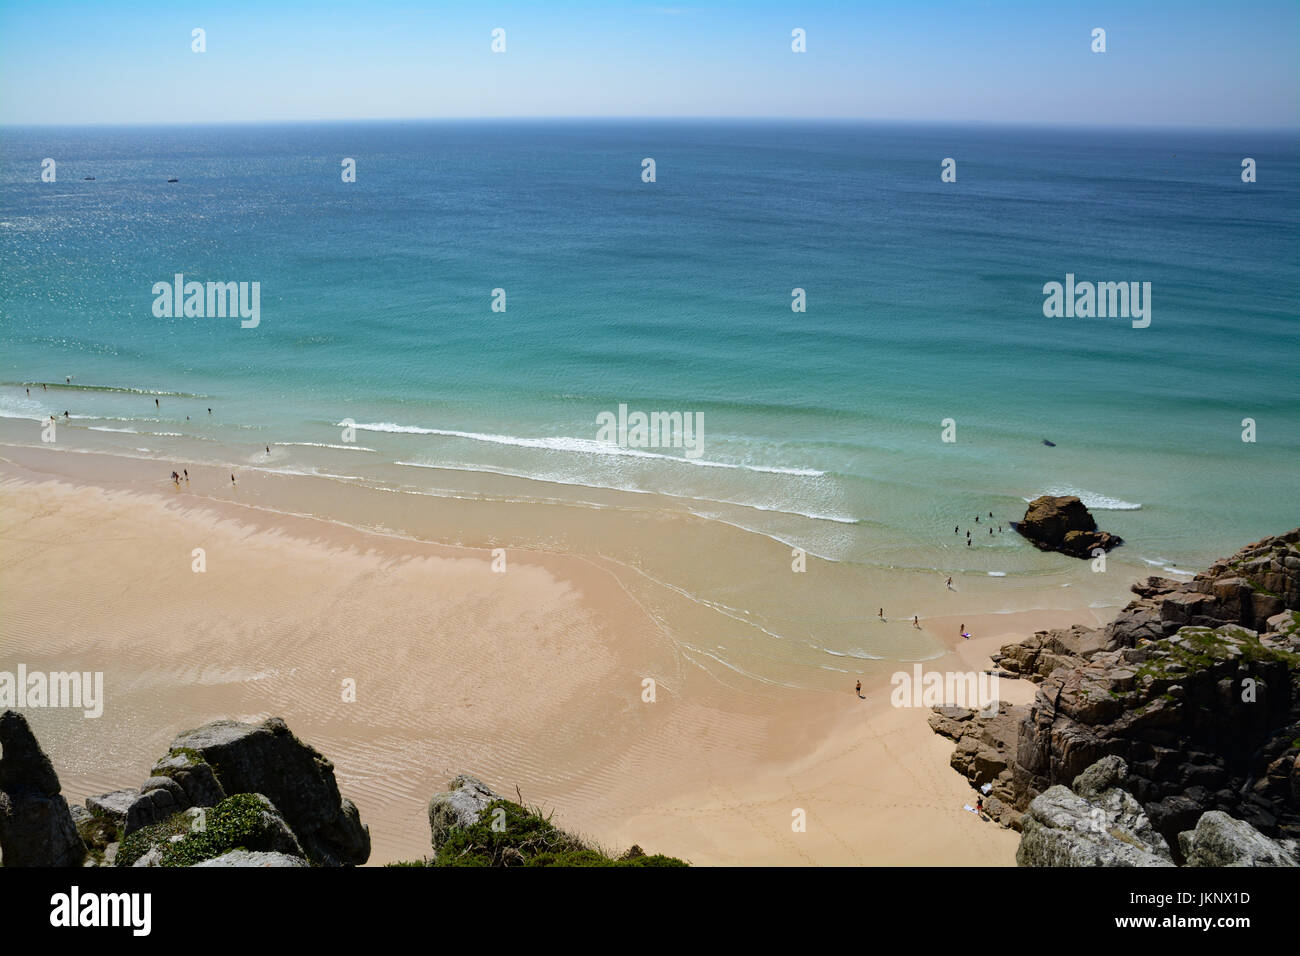 Treen, Cornwall, UK. 24th July 2017. UK Weather. With monday looking to be the best day of the week, tourists made their way down to the turquoise waters at Treen Beach, with many German holiday makers amongst them. Credit: cwallpix/Alamy Live News Stock Photo